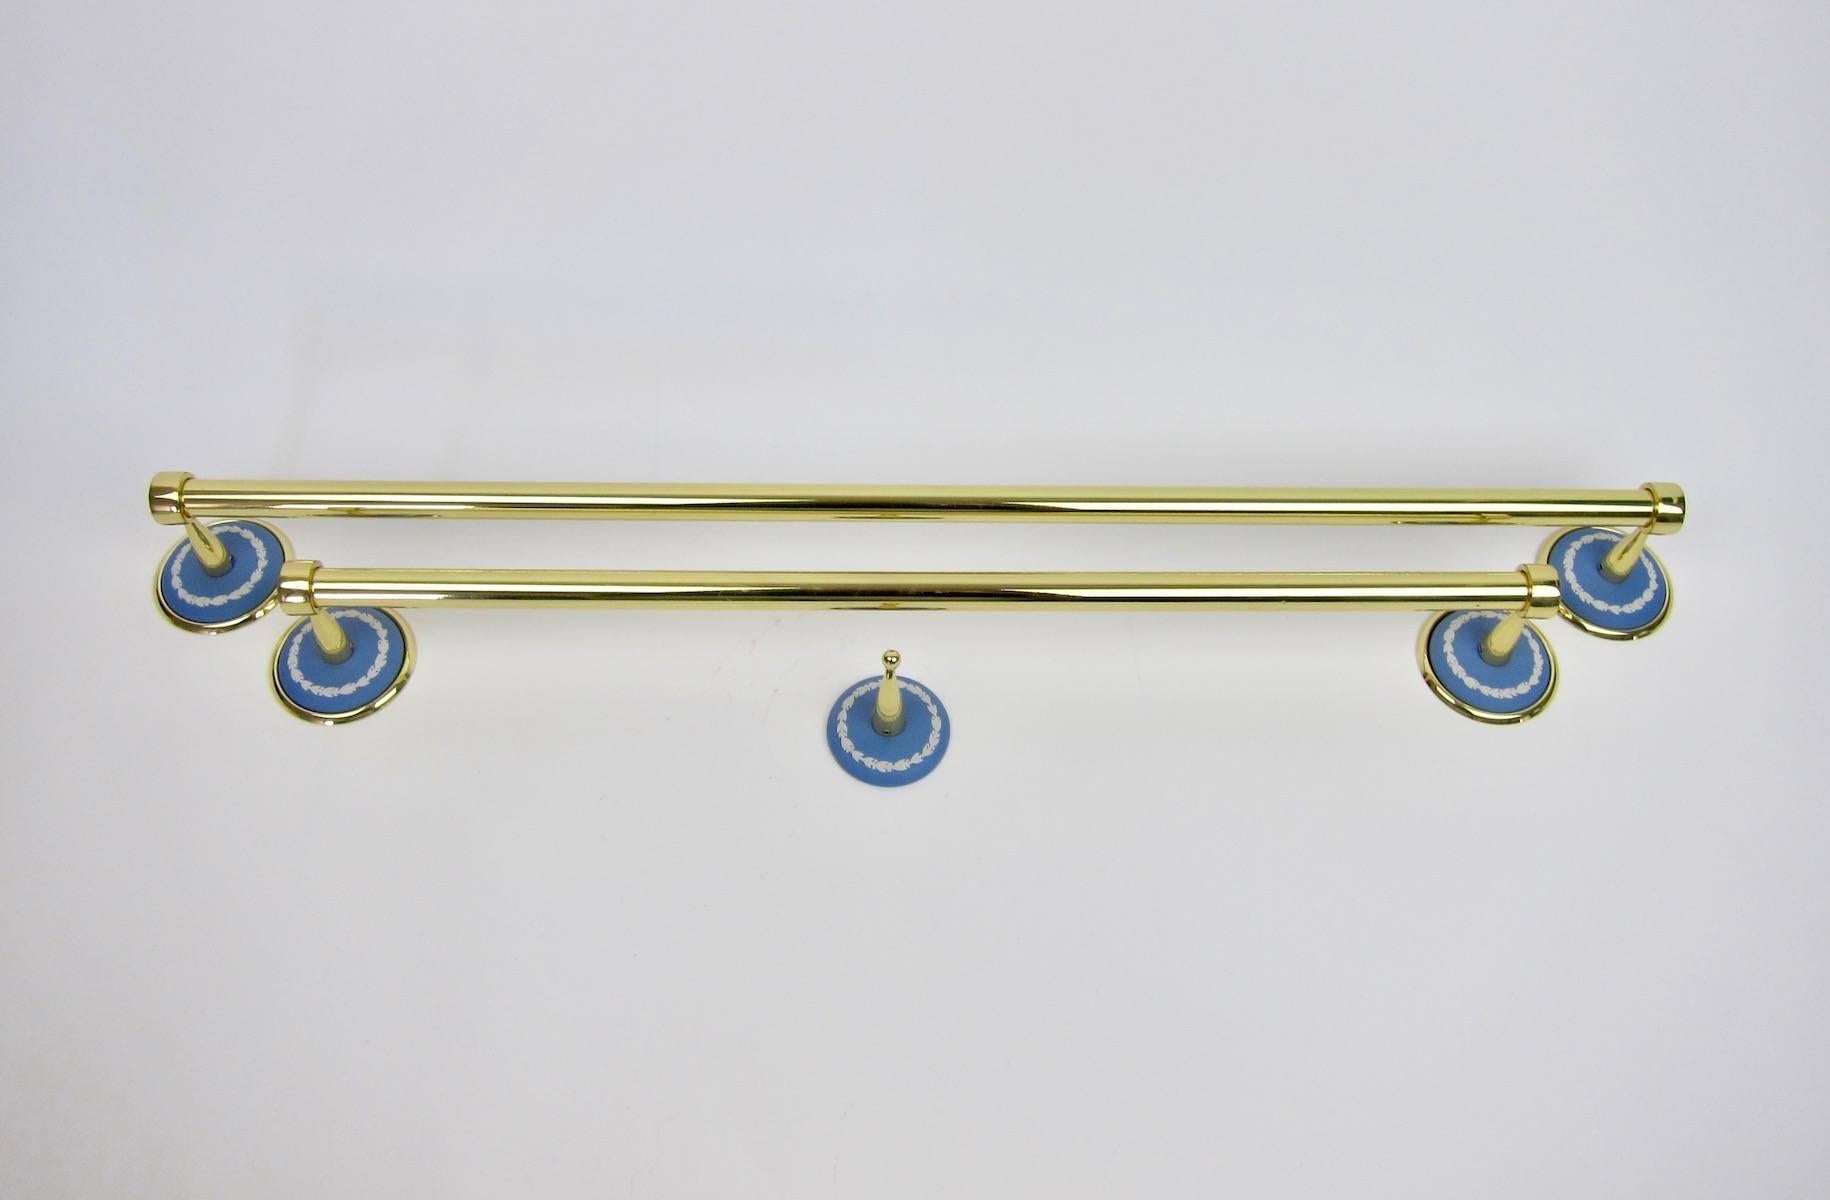 An unusual set of vintage accessories for the bath, consisting of two brass towel bars and a single hook with contrasting Wedgwood Jasper ware accents. The blue jasper discs are decorated with white blossom border garlands in low-relief.

Each